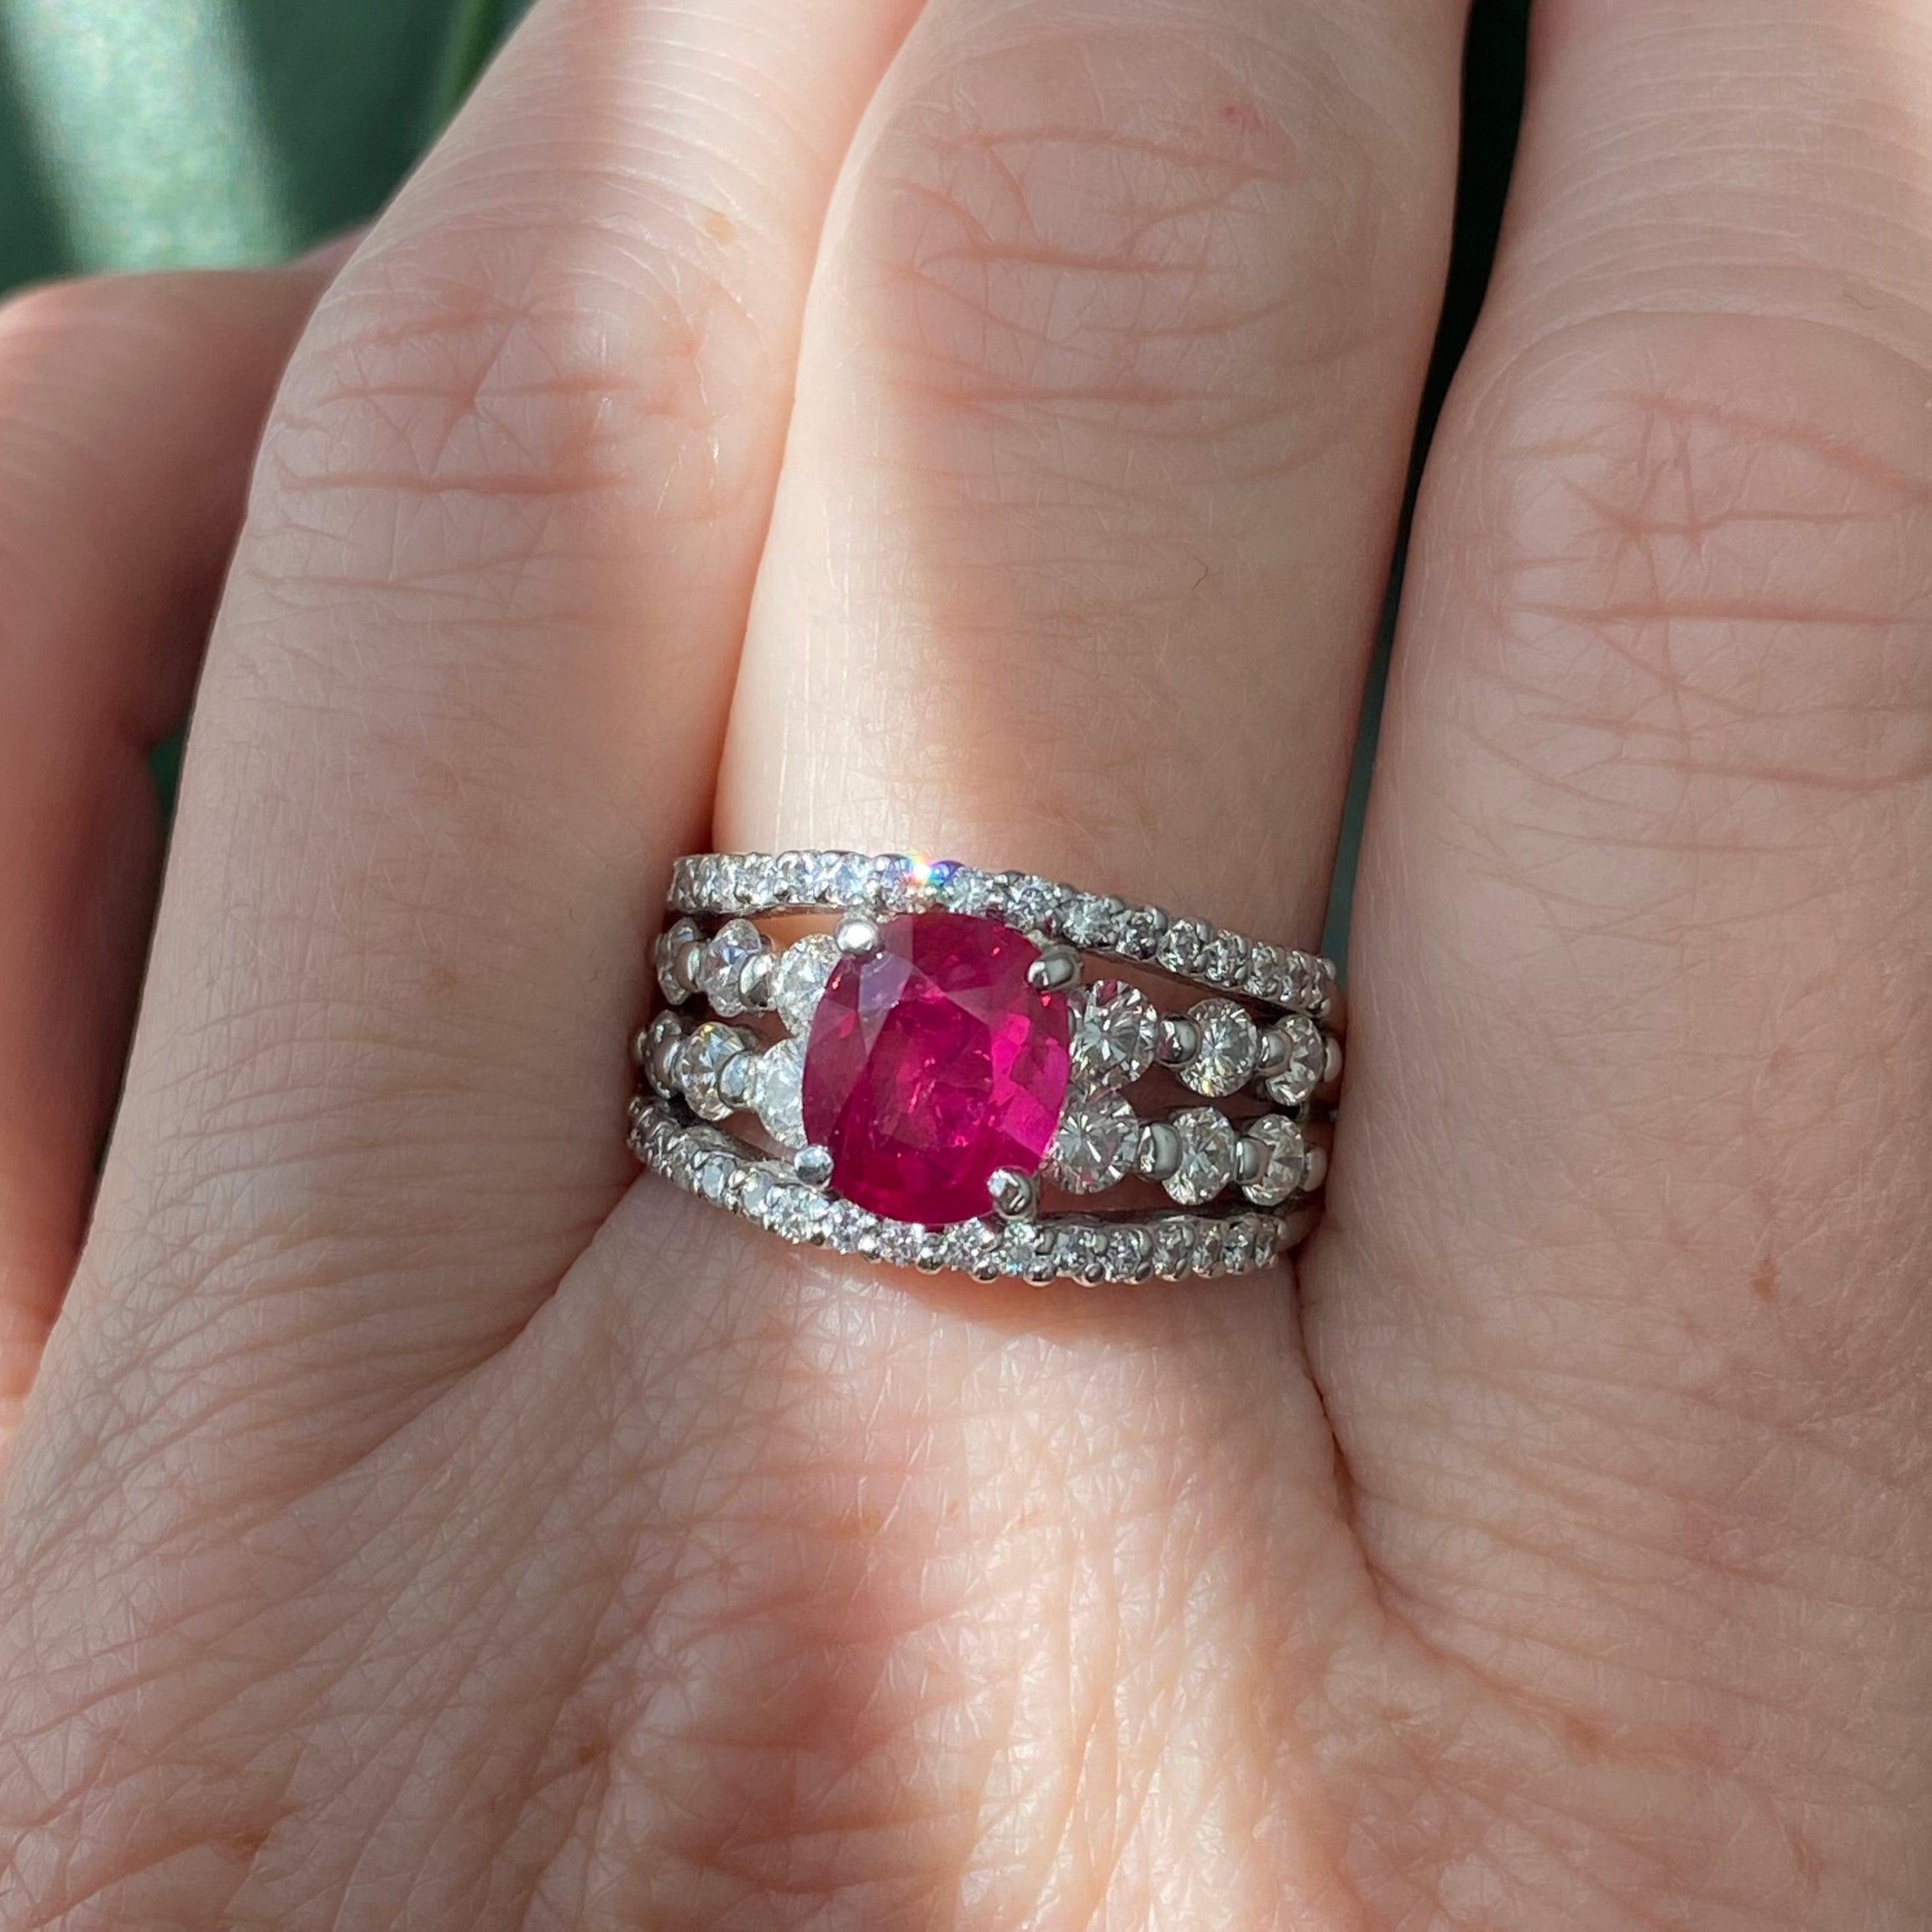 Crafted in platinum, the ring features an oval ruby solitaire set in a graduating wide band style diamond setting. The contrast of the perfect red color and the white diamonds makes this ring truly magical. The ruby just glows in the sunlight.